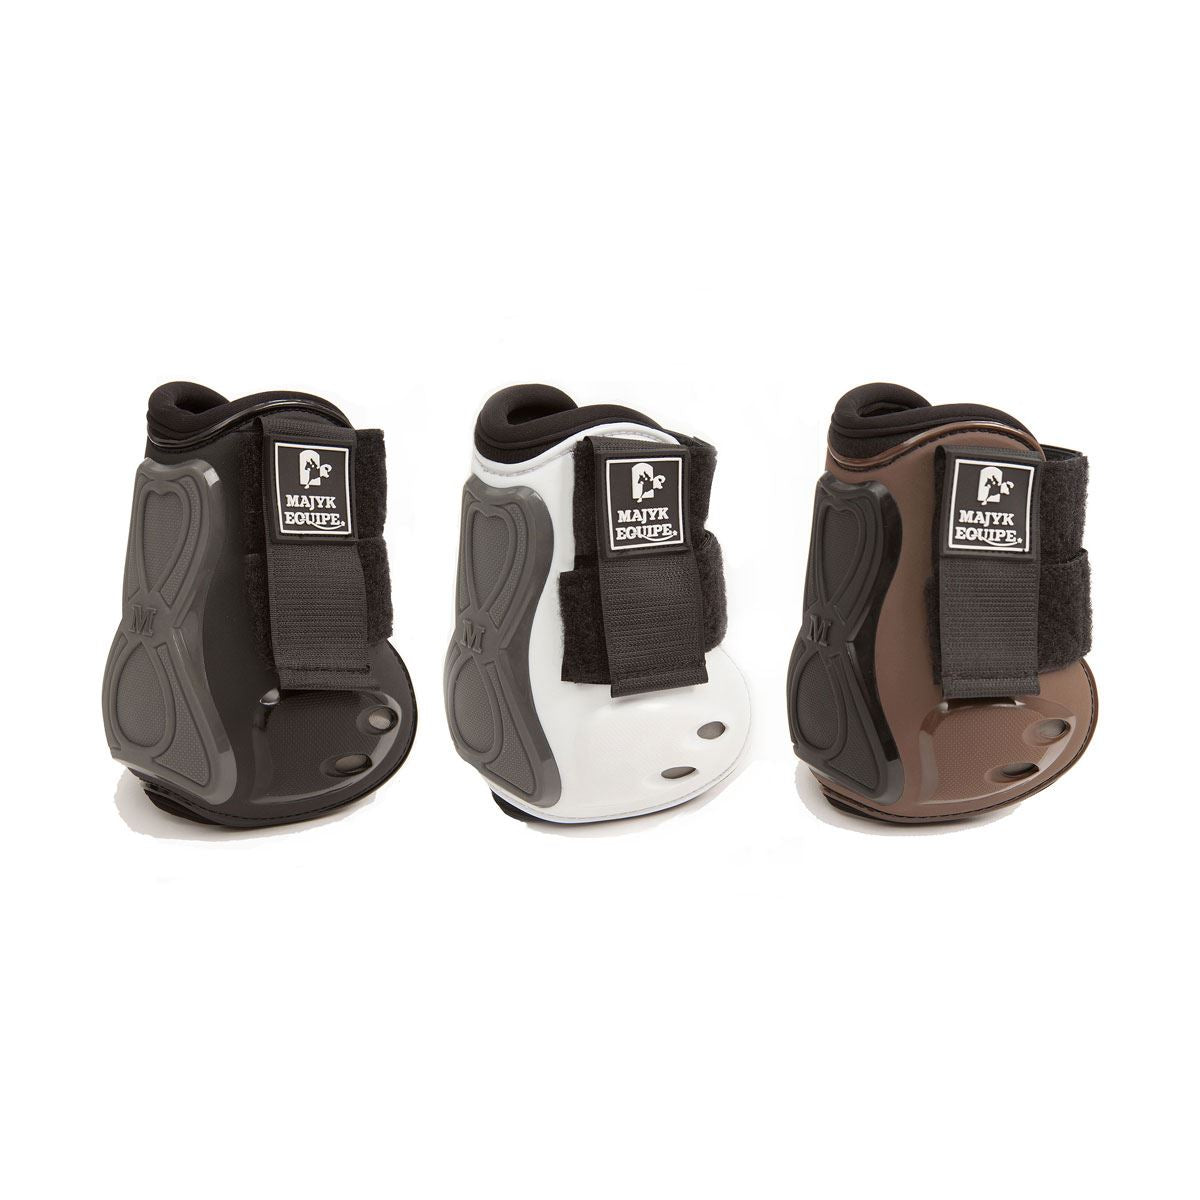 Majyk Equipe Series 3 Infinity Hind Jump Boot - Just Horse Riders